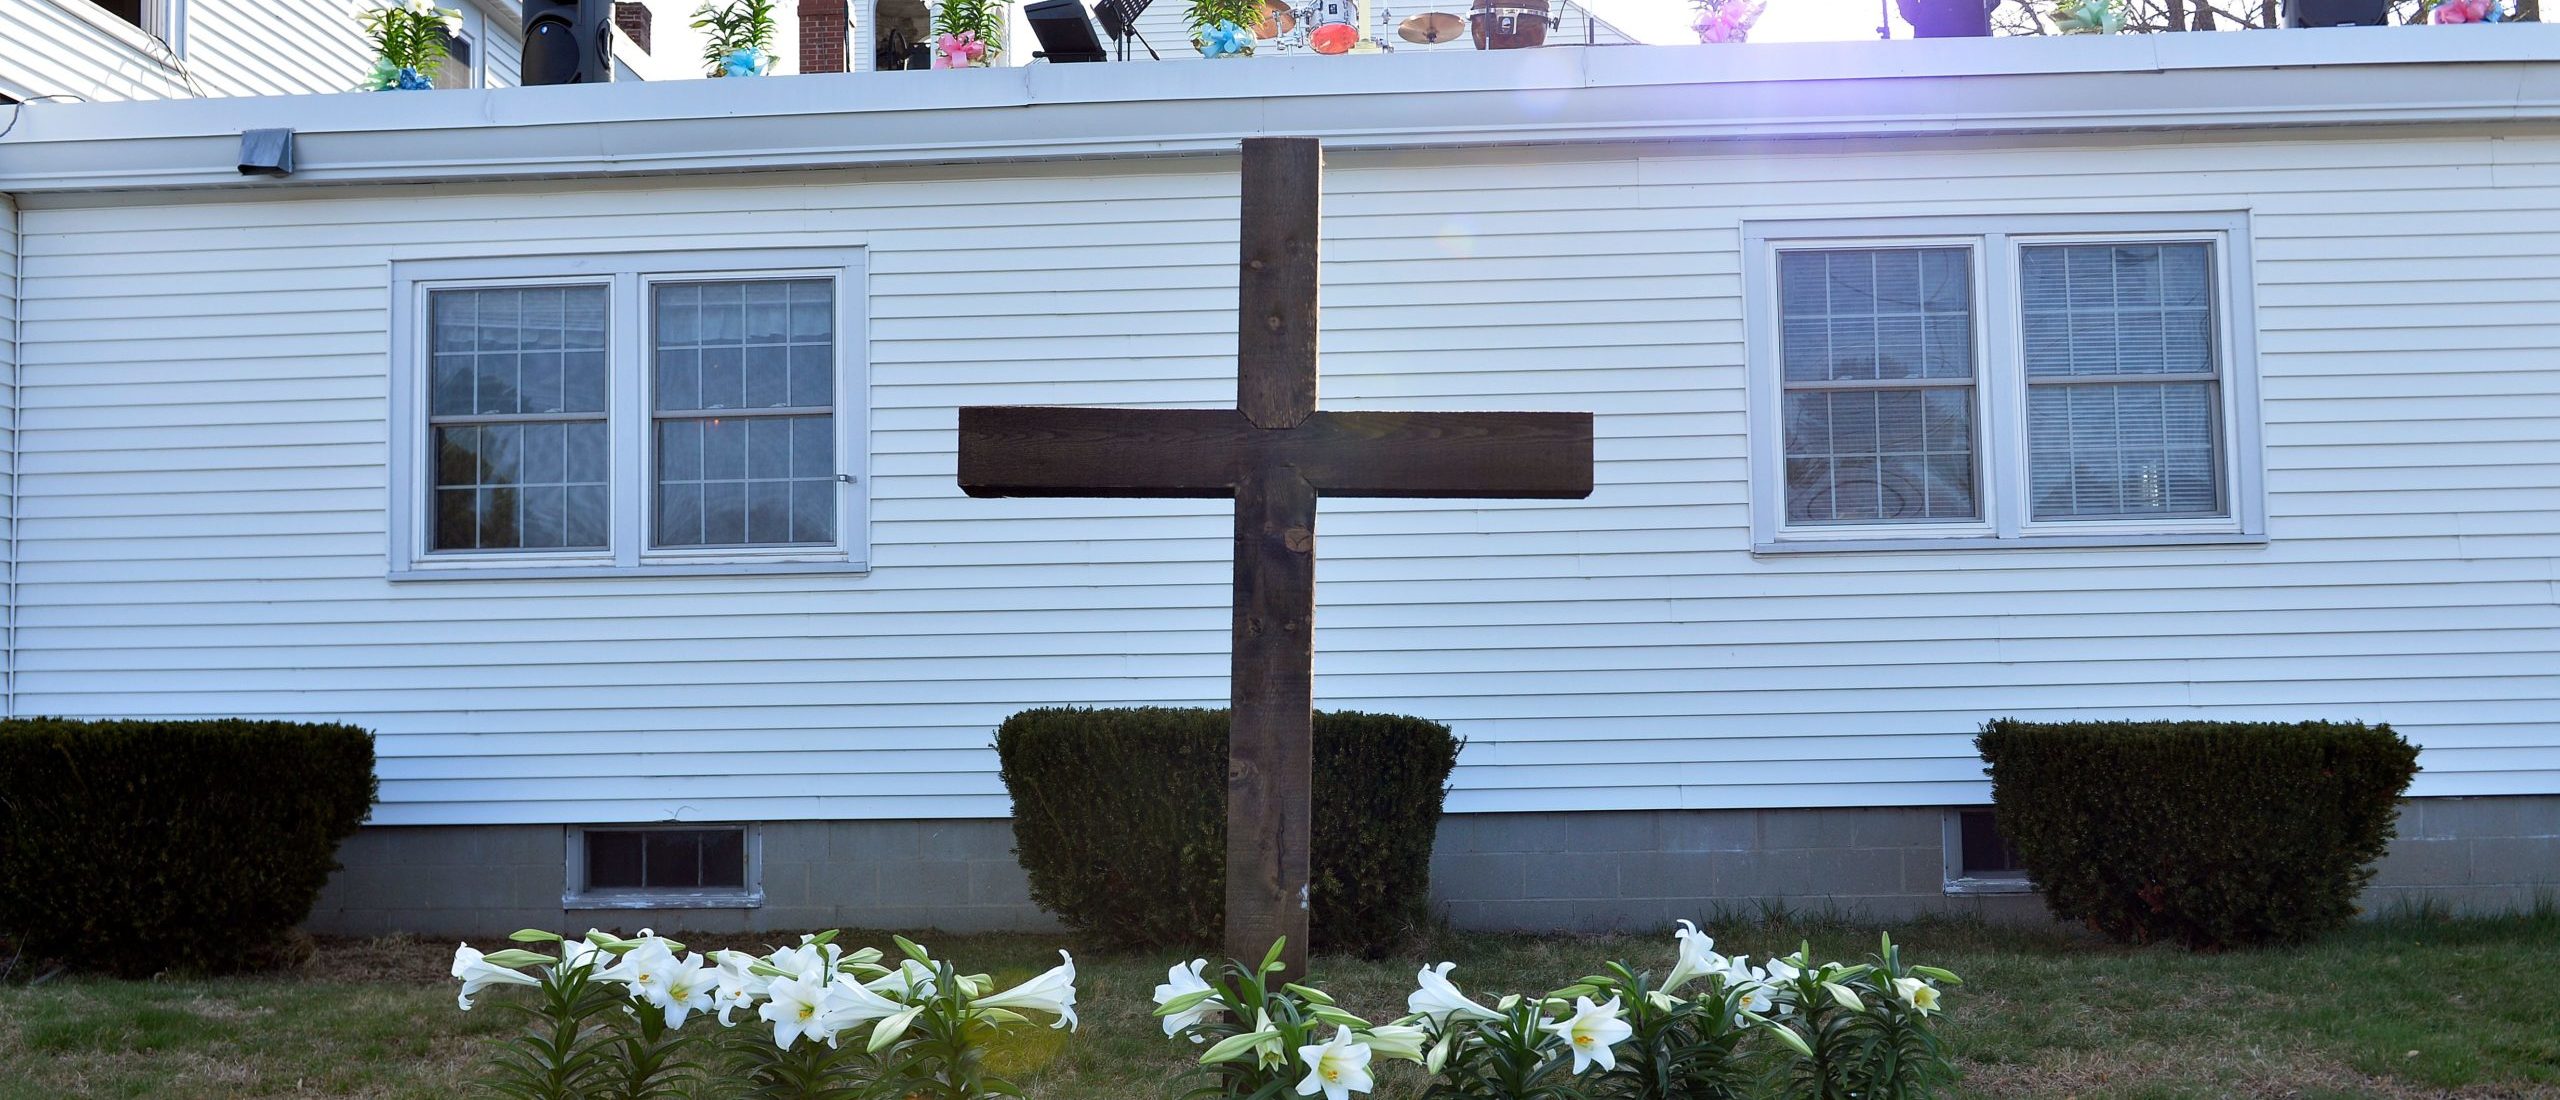 REPORT: Family Fined $100 For Putting Full-Size Cross On Their Yard